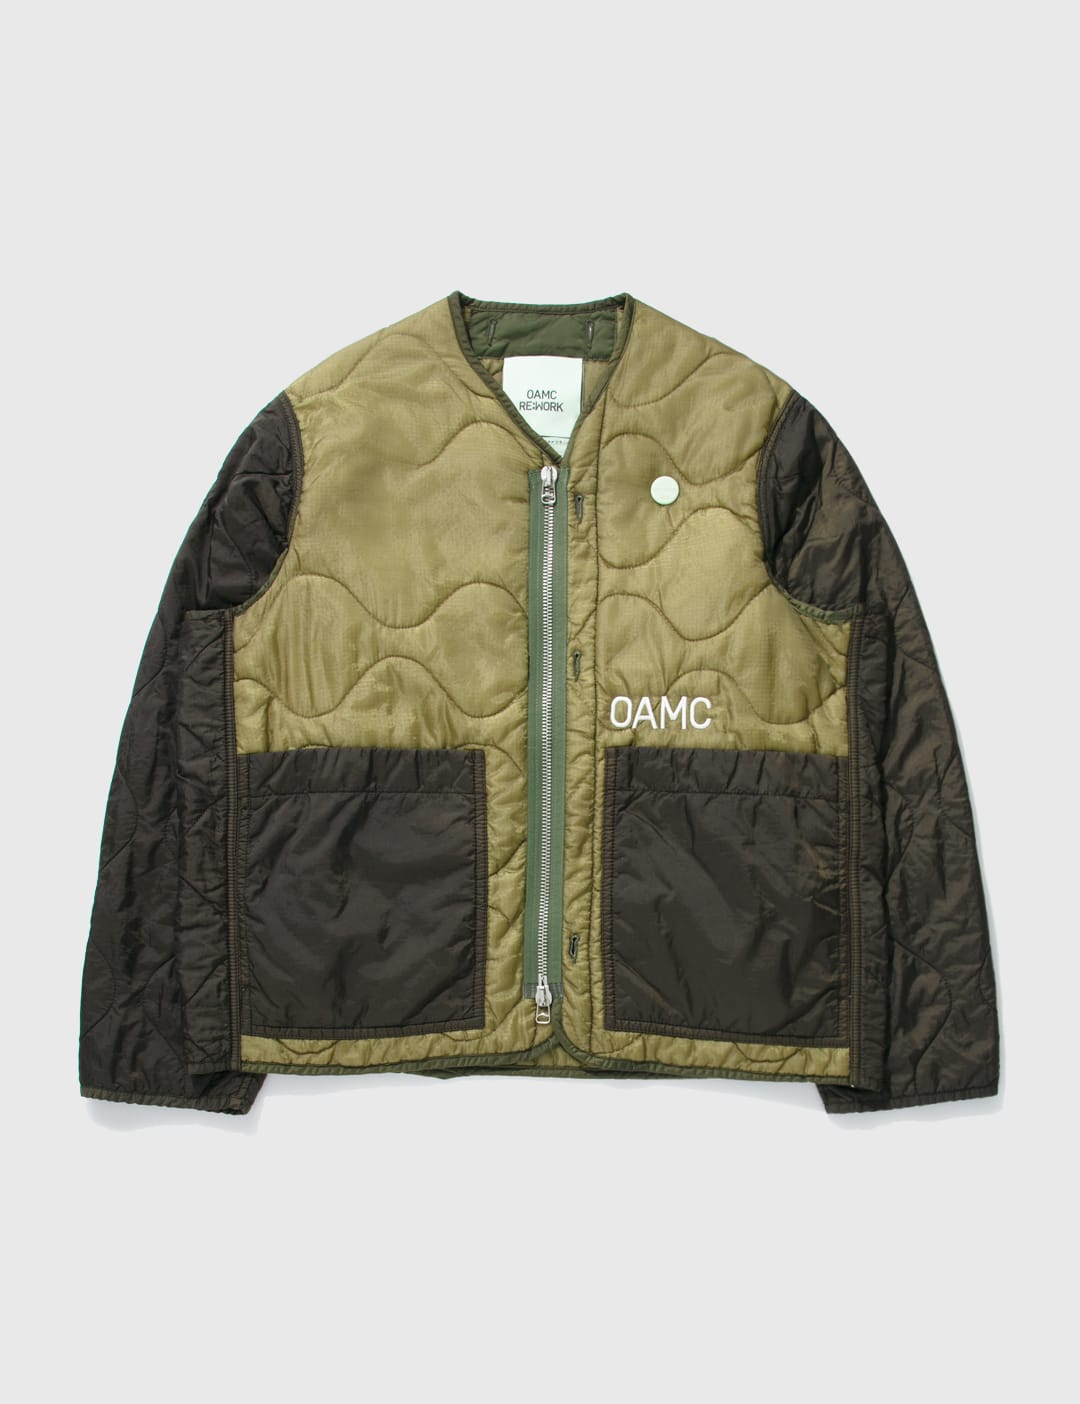 OAMC - RE:WORK ZIPPED LINER | HBX - Globally Curated Fashion and Lifestyle  by Hypebeast